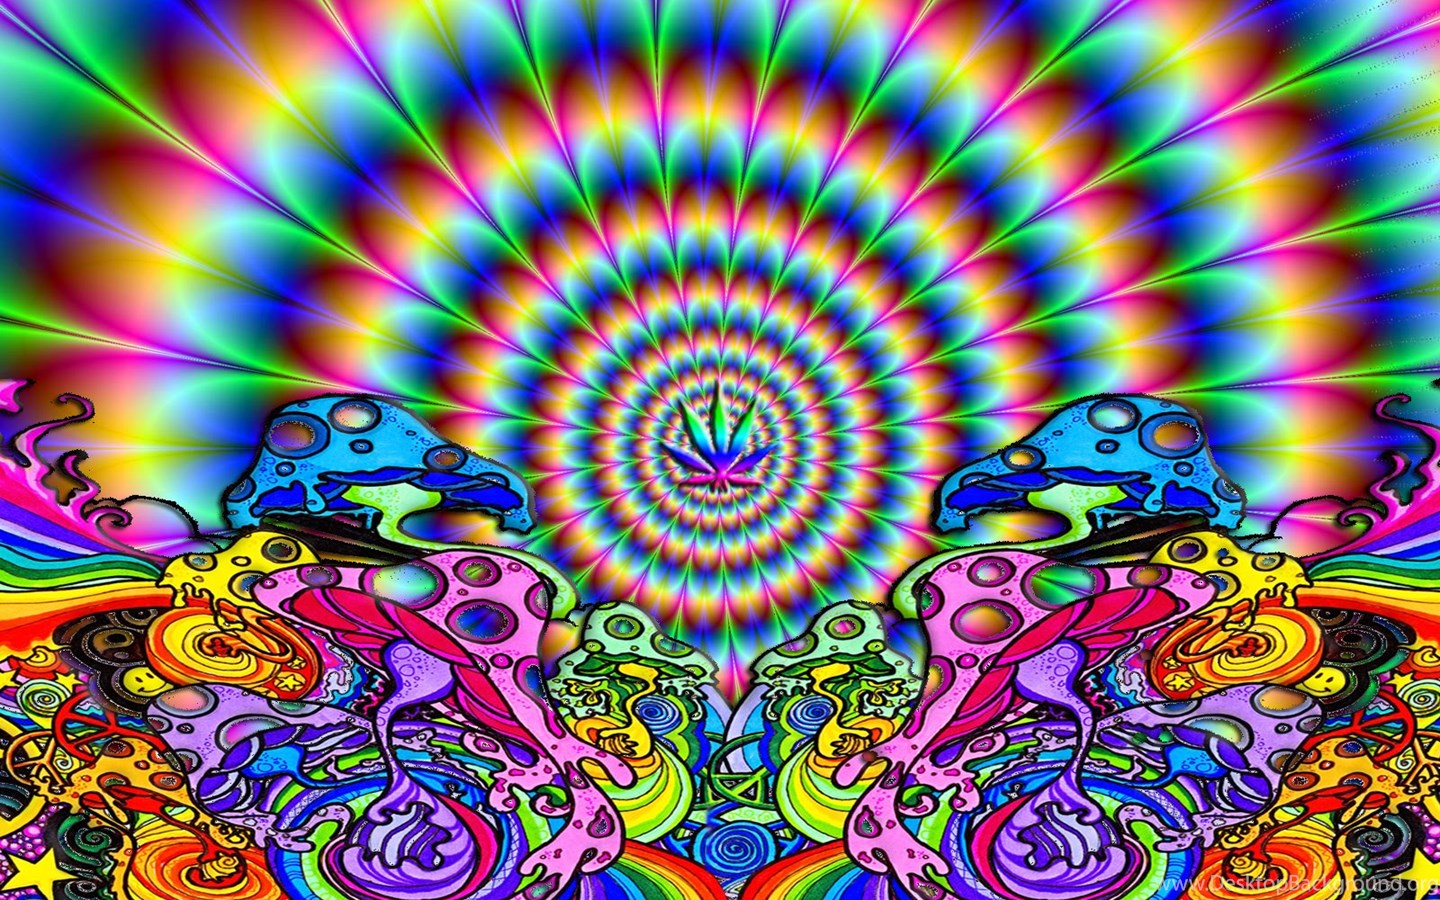 Download Trippy Weed Backgrounds 12093 Hd Pictures Popular 1440x900 Desktop...